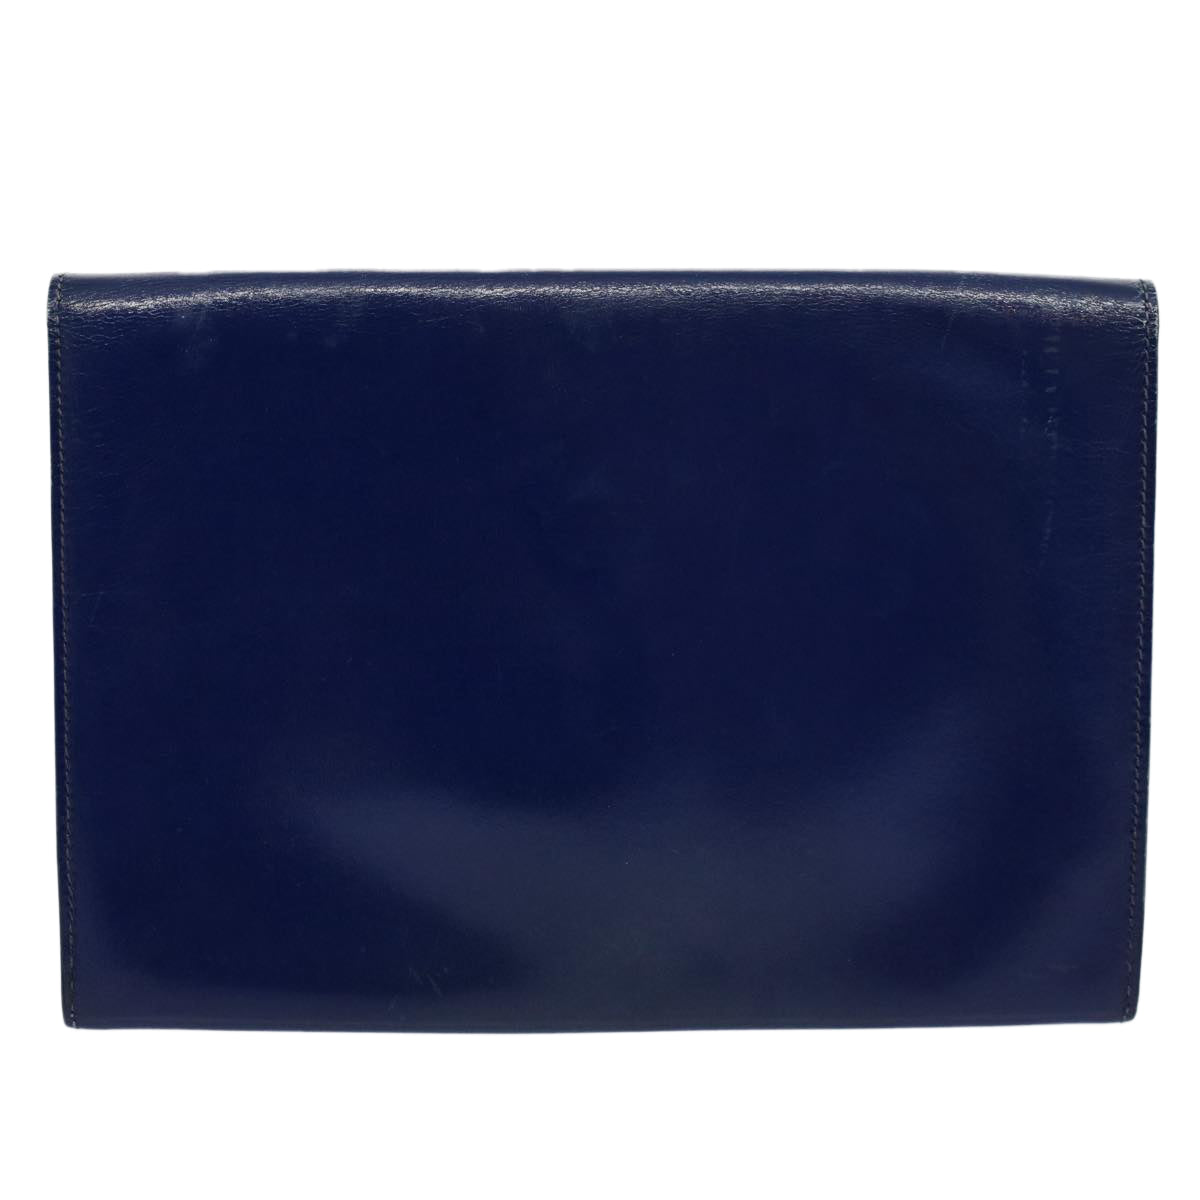 HERMES Clutch Bag Leather Blue Auth bs10101 - 0